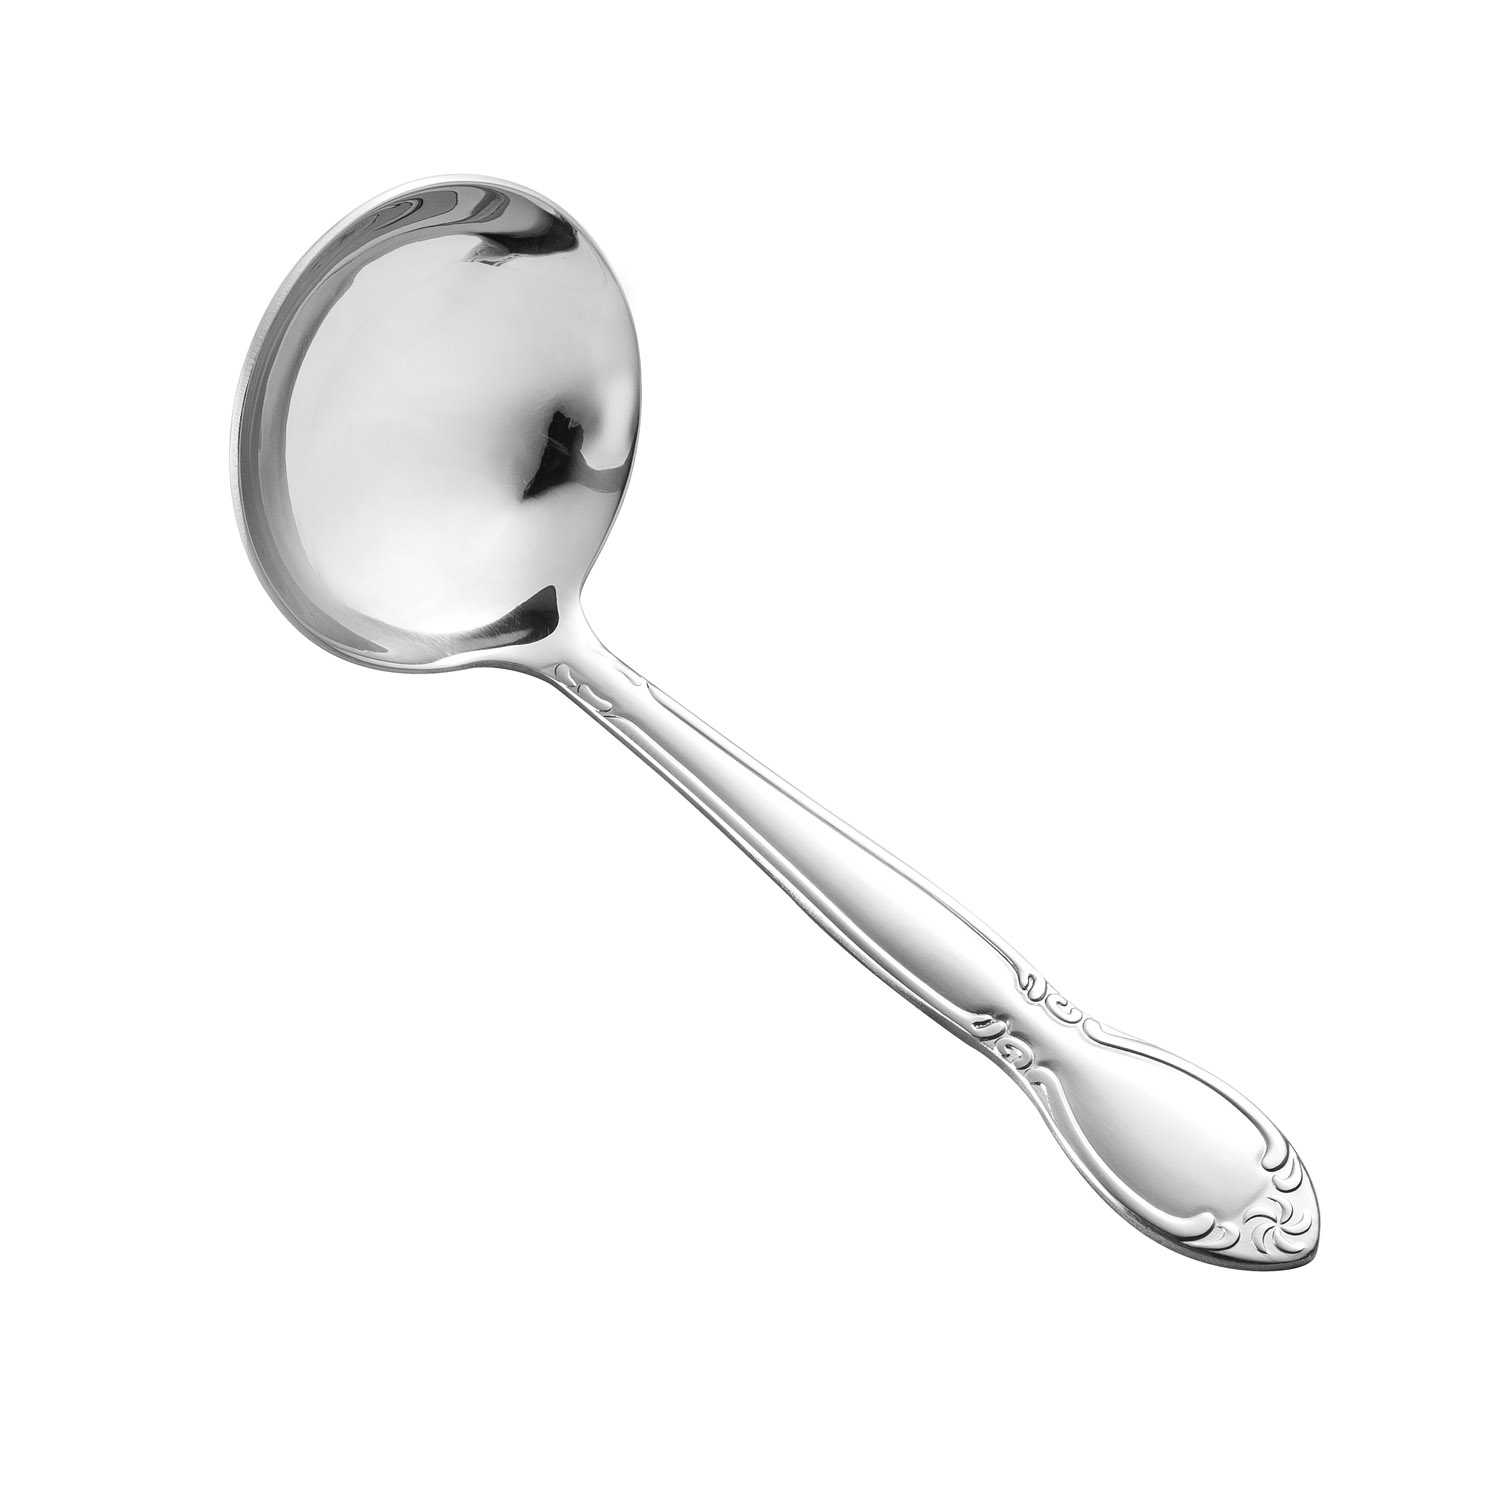 CAC China 3023-36 Stainless Steel Louvre Ladle, Extra Heavy Weight 18/0, 1 oz., 7" - 1 dozen